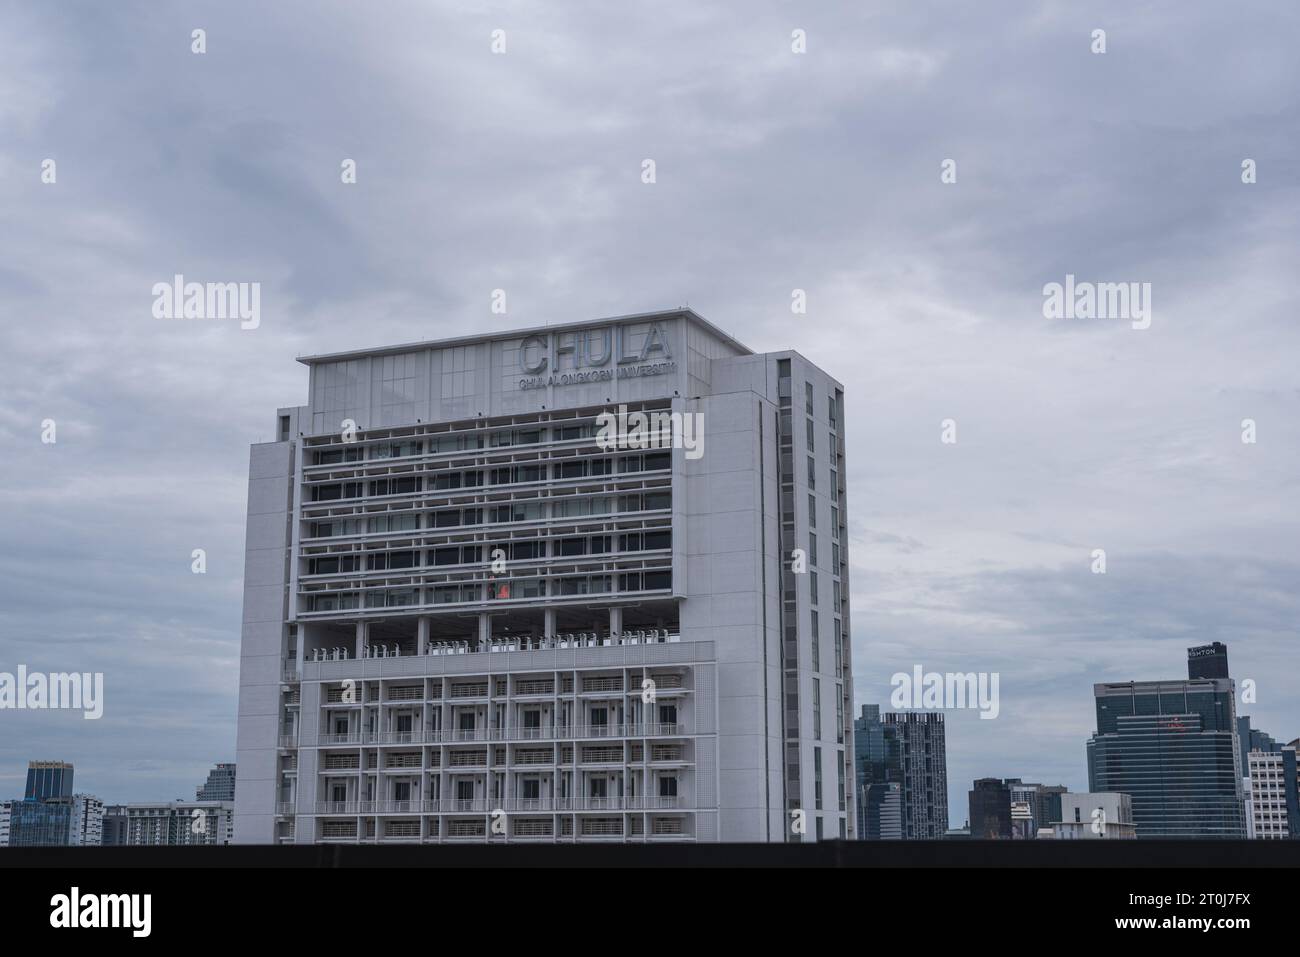 Bangkok, Thailand - September 16, 2023: one of the buildings of Chulalongkorn University with a sign "Chula, Chulalongkorn University". Stock Photo